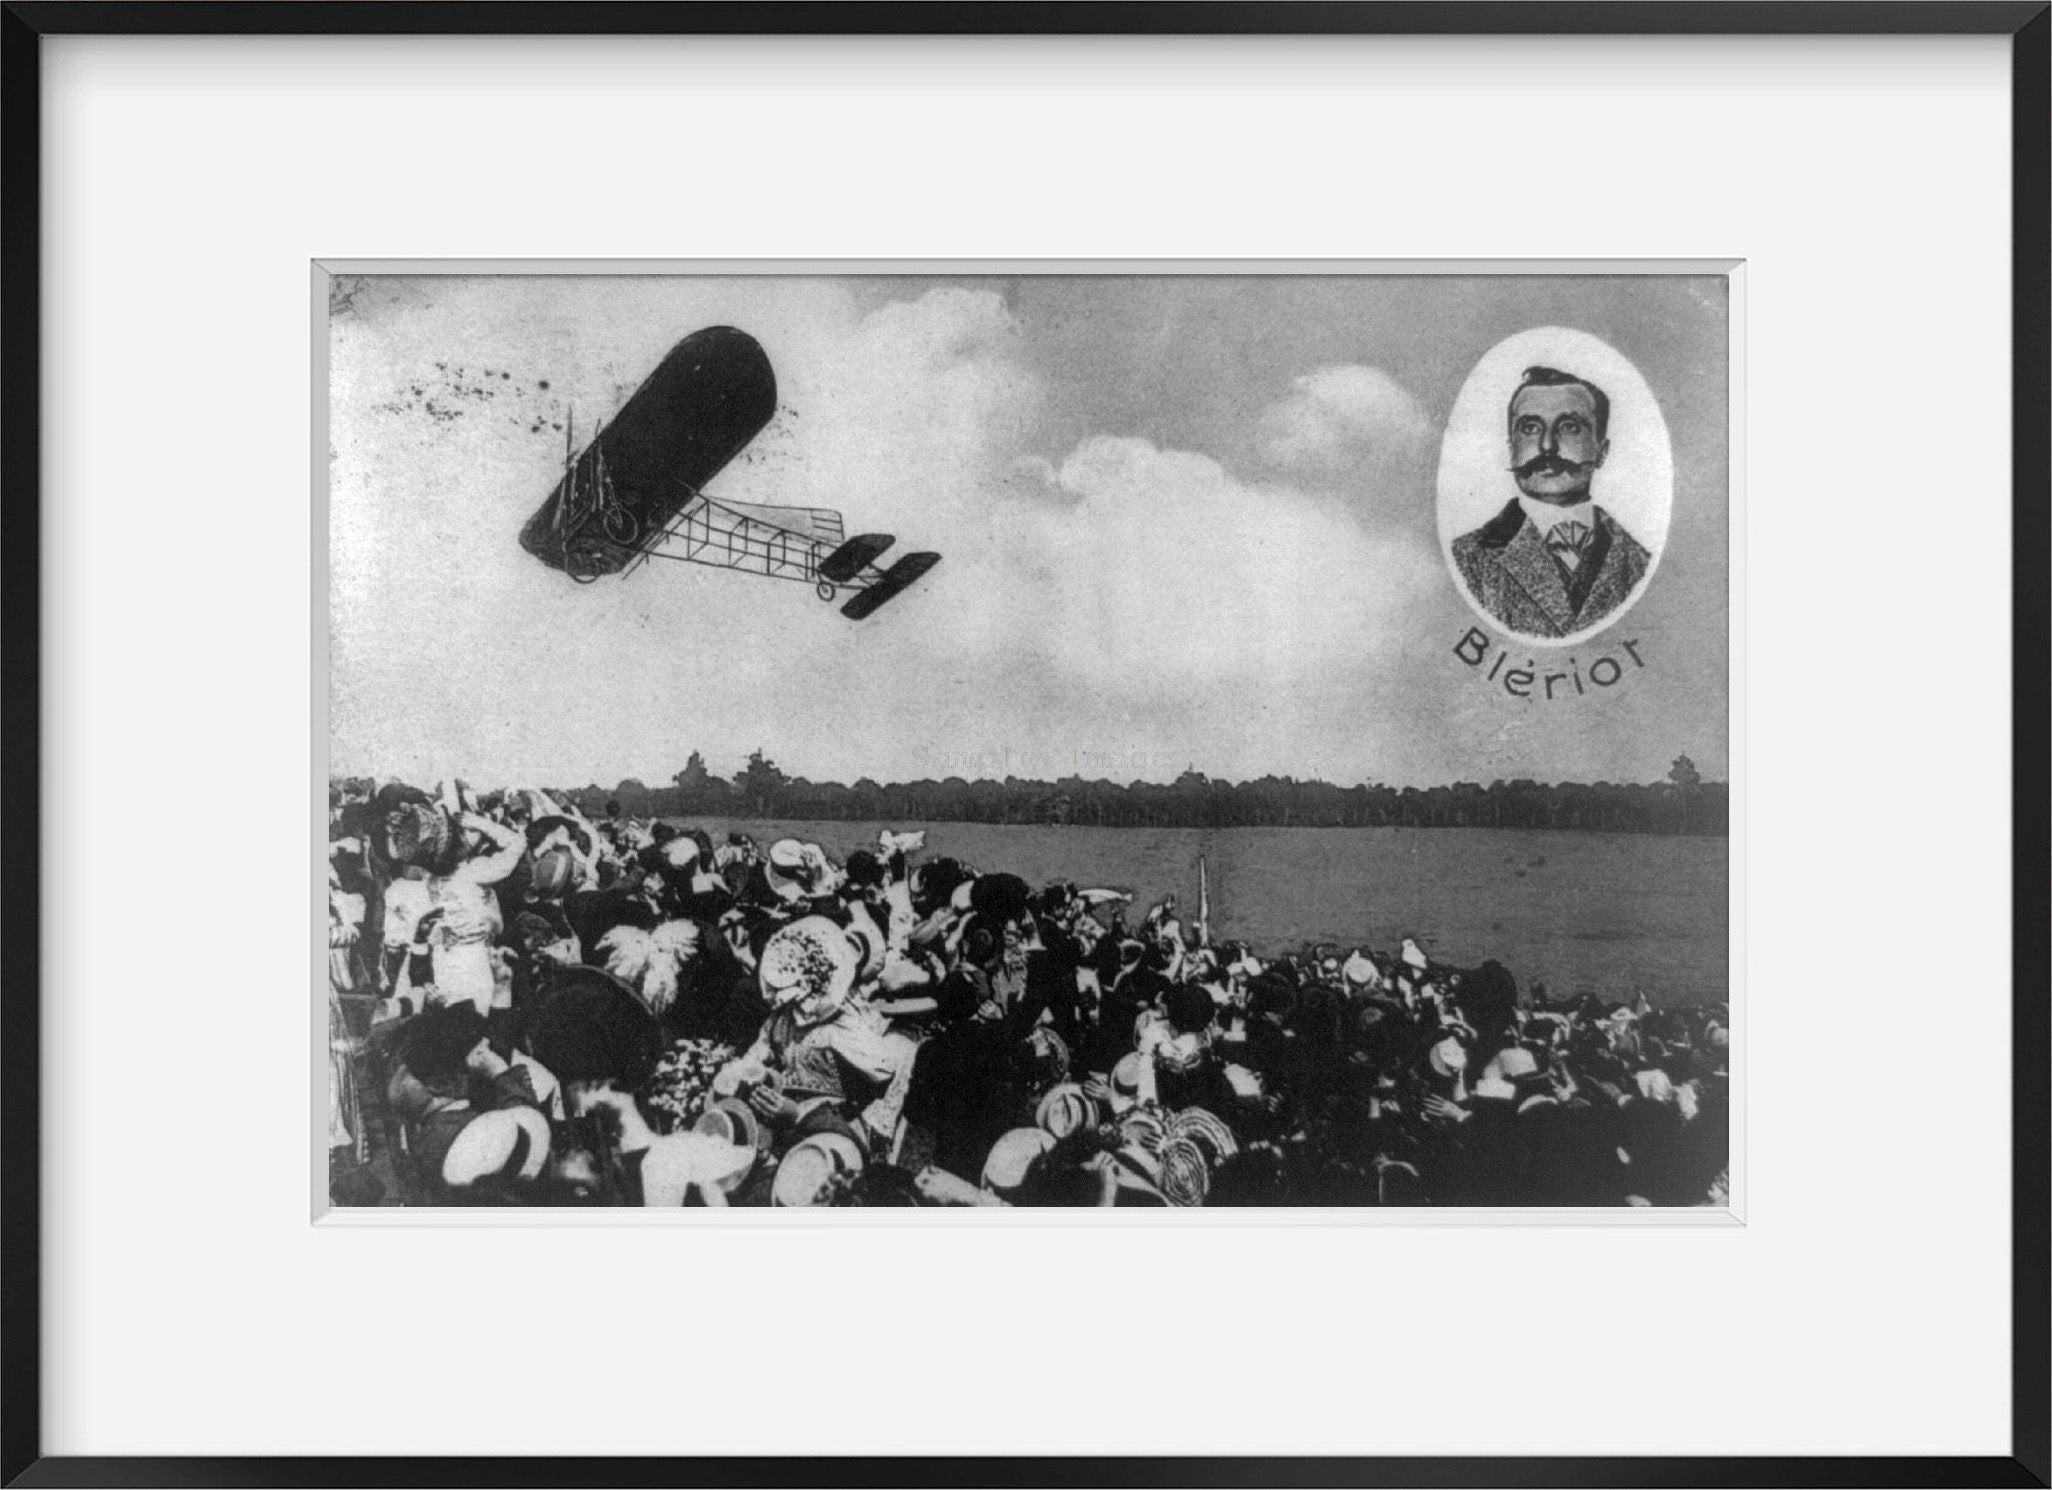 1910? photograph of Louis Blériot and his plane flying over spectators